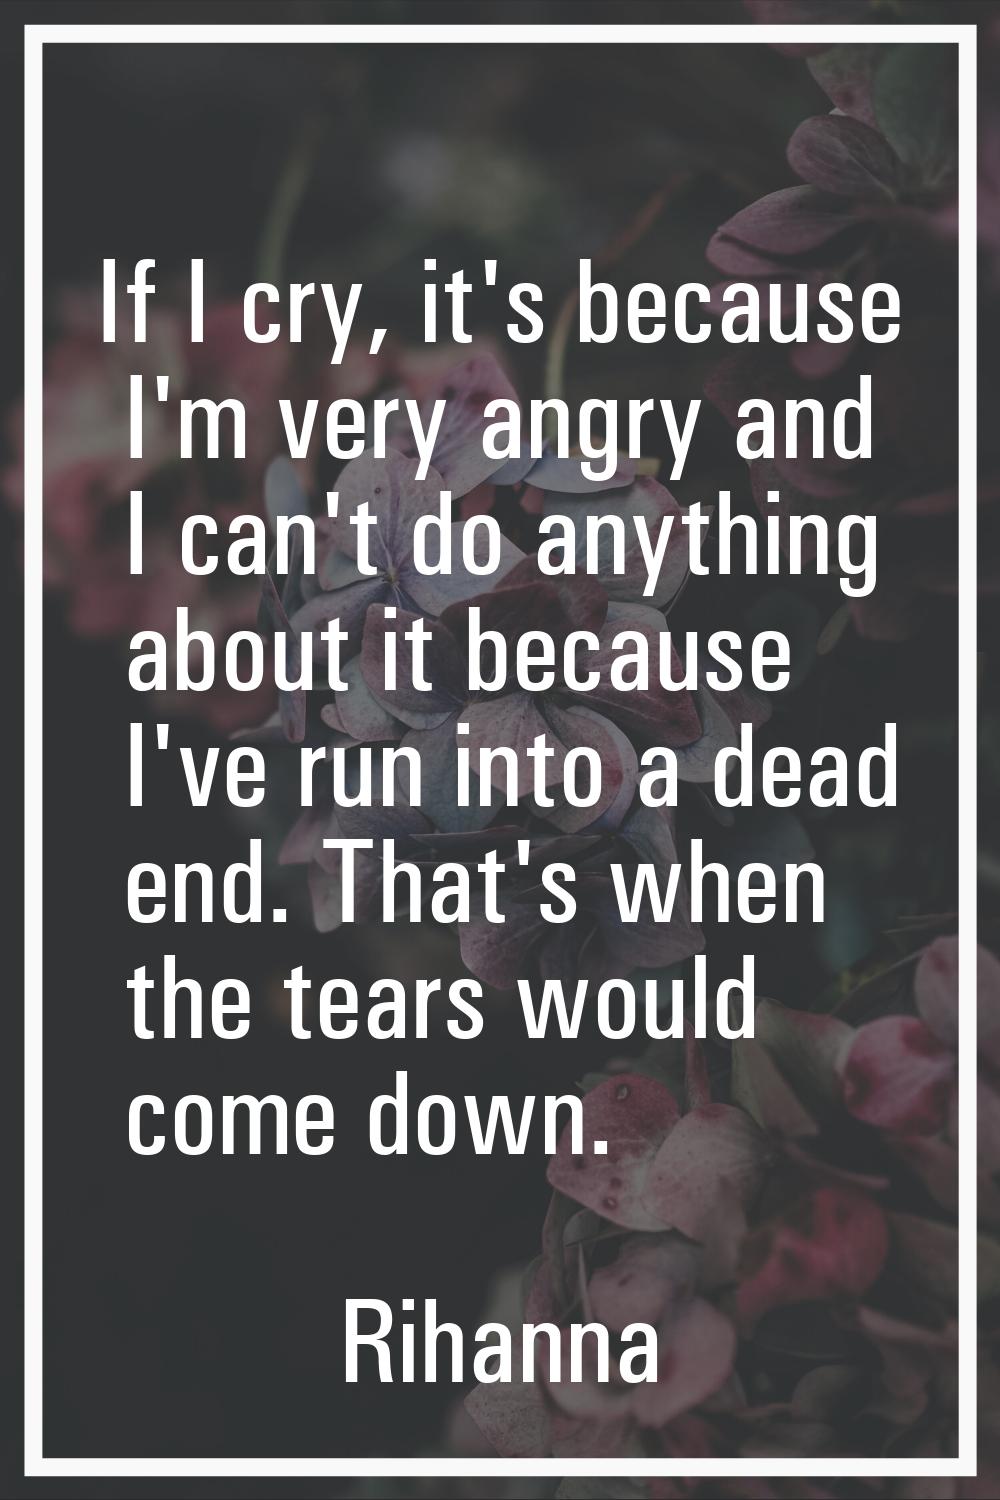 If I cry, it's because I'm very angry and I can't do anything about it because I've run into a dead